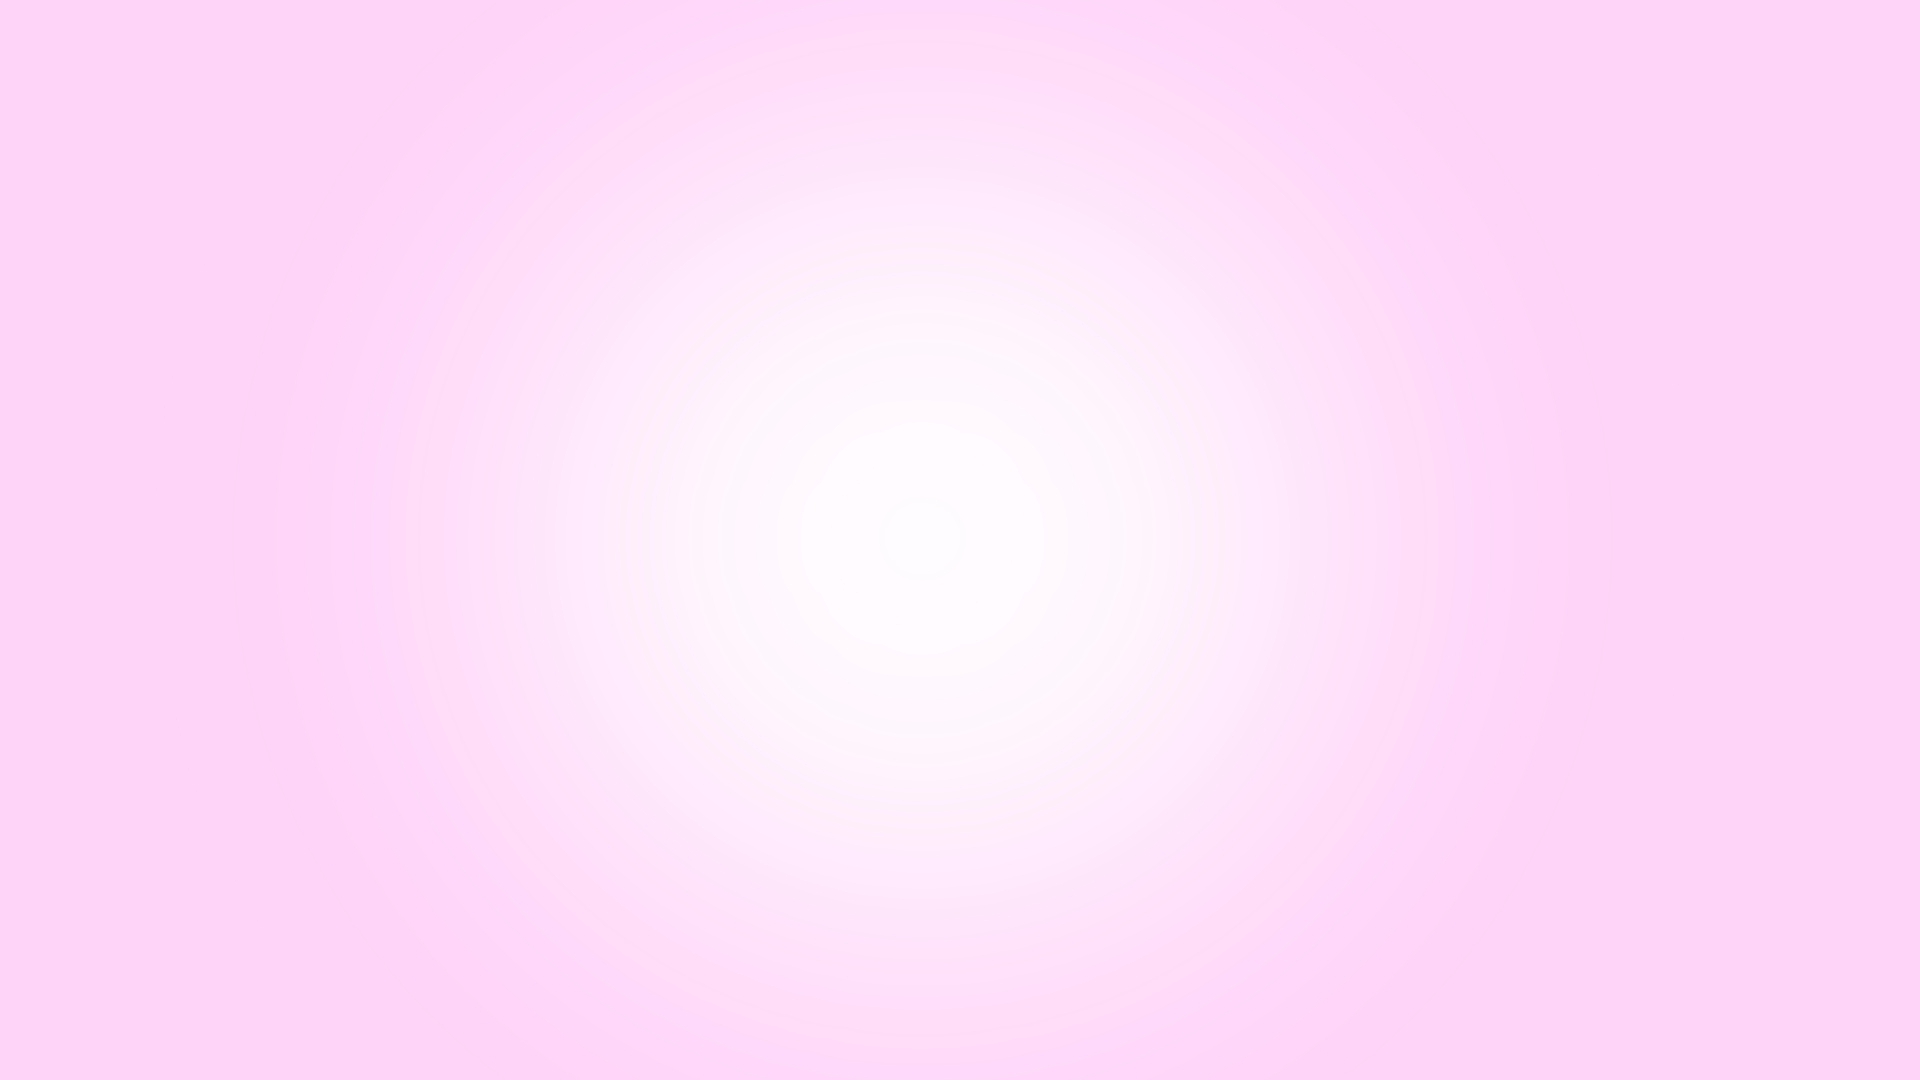 White And Pink Wallpaper - Wallpapers High Definition